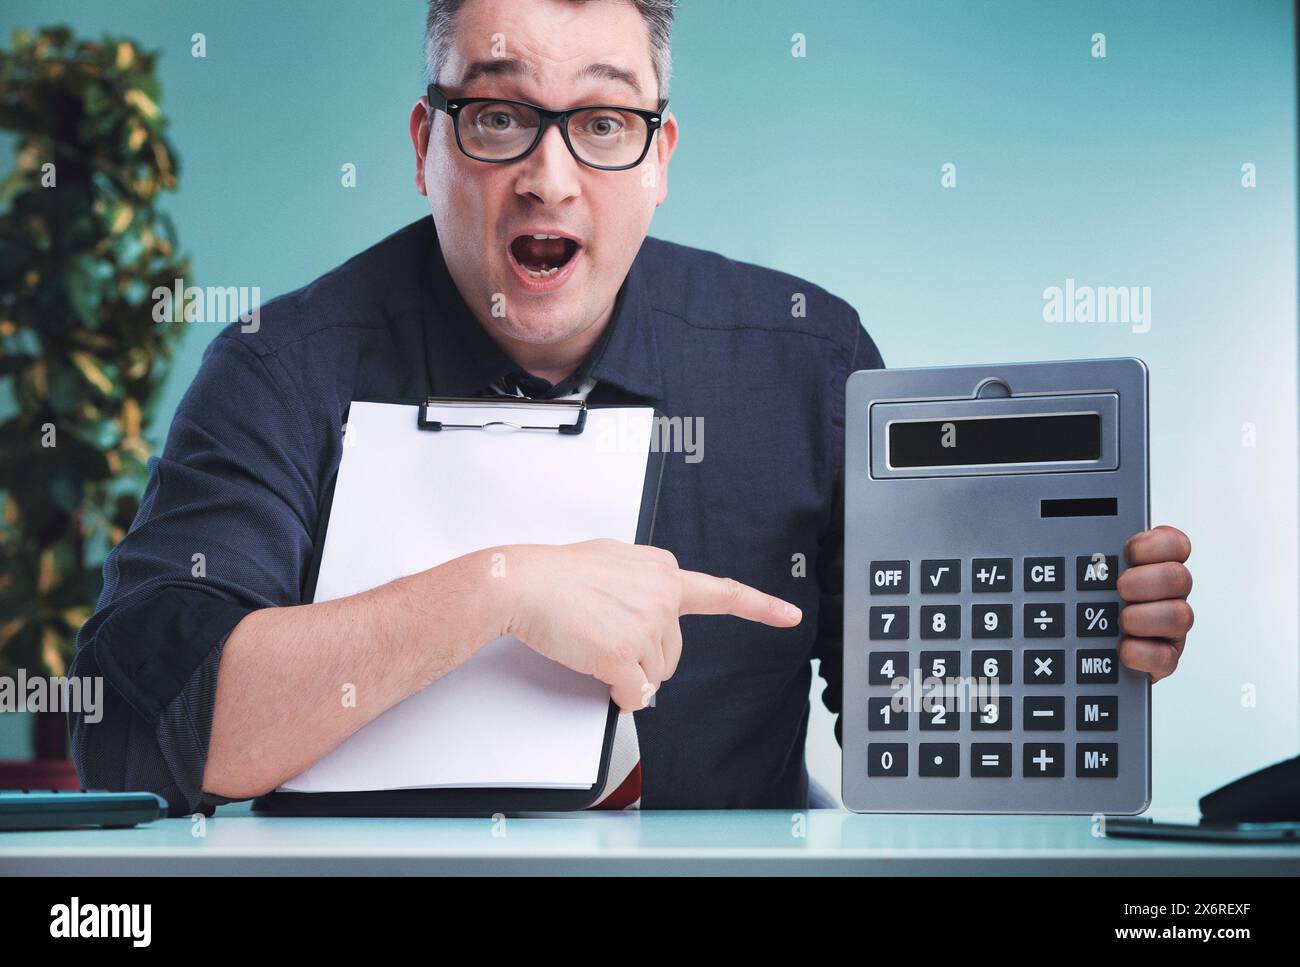 Man in dark shirt and glasses, holding a clipboard with one hand and pointing at a large calculator with the other, expresses surprise, seated at a de Stock Photo